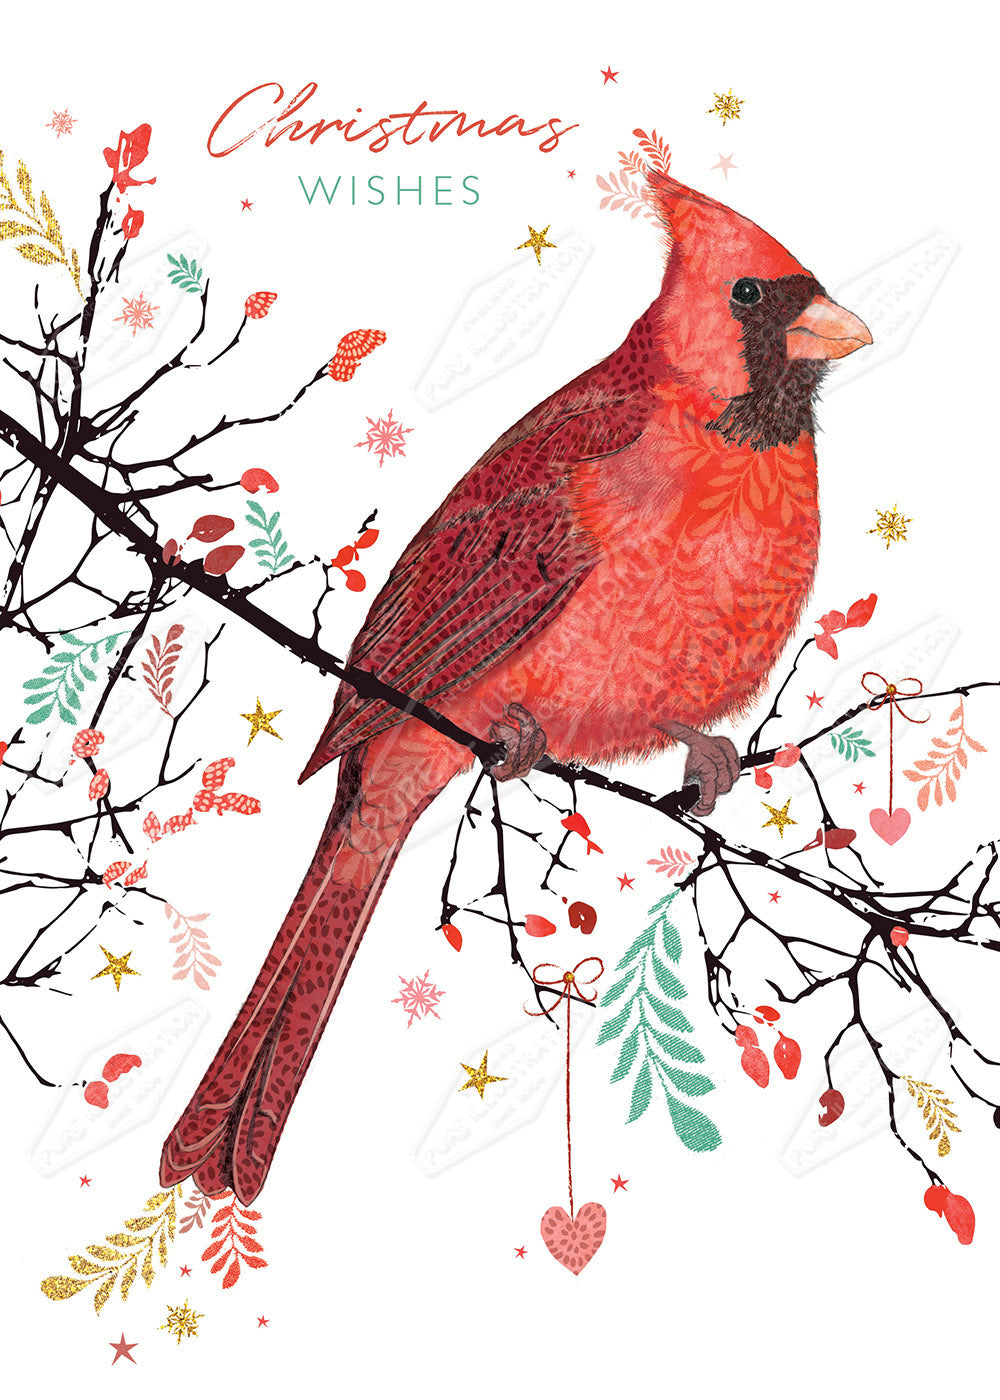 Cardinal Design by Victoria Marks for Pure Art Licensing Agency & Surface Design Studio